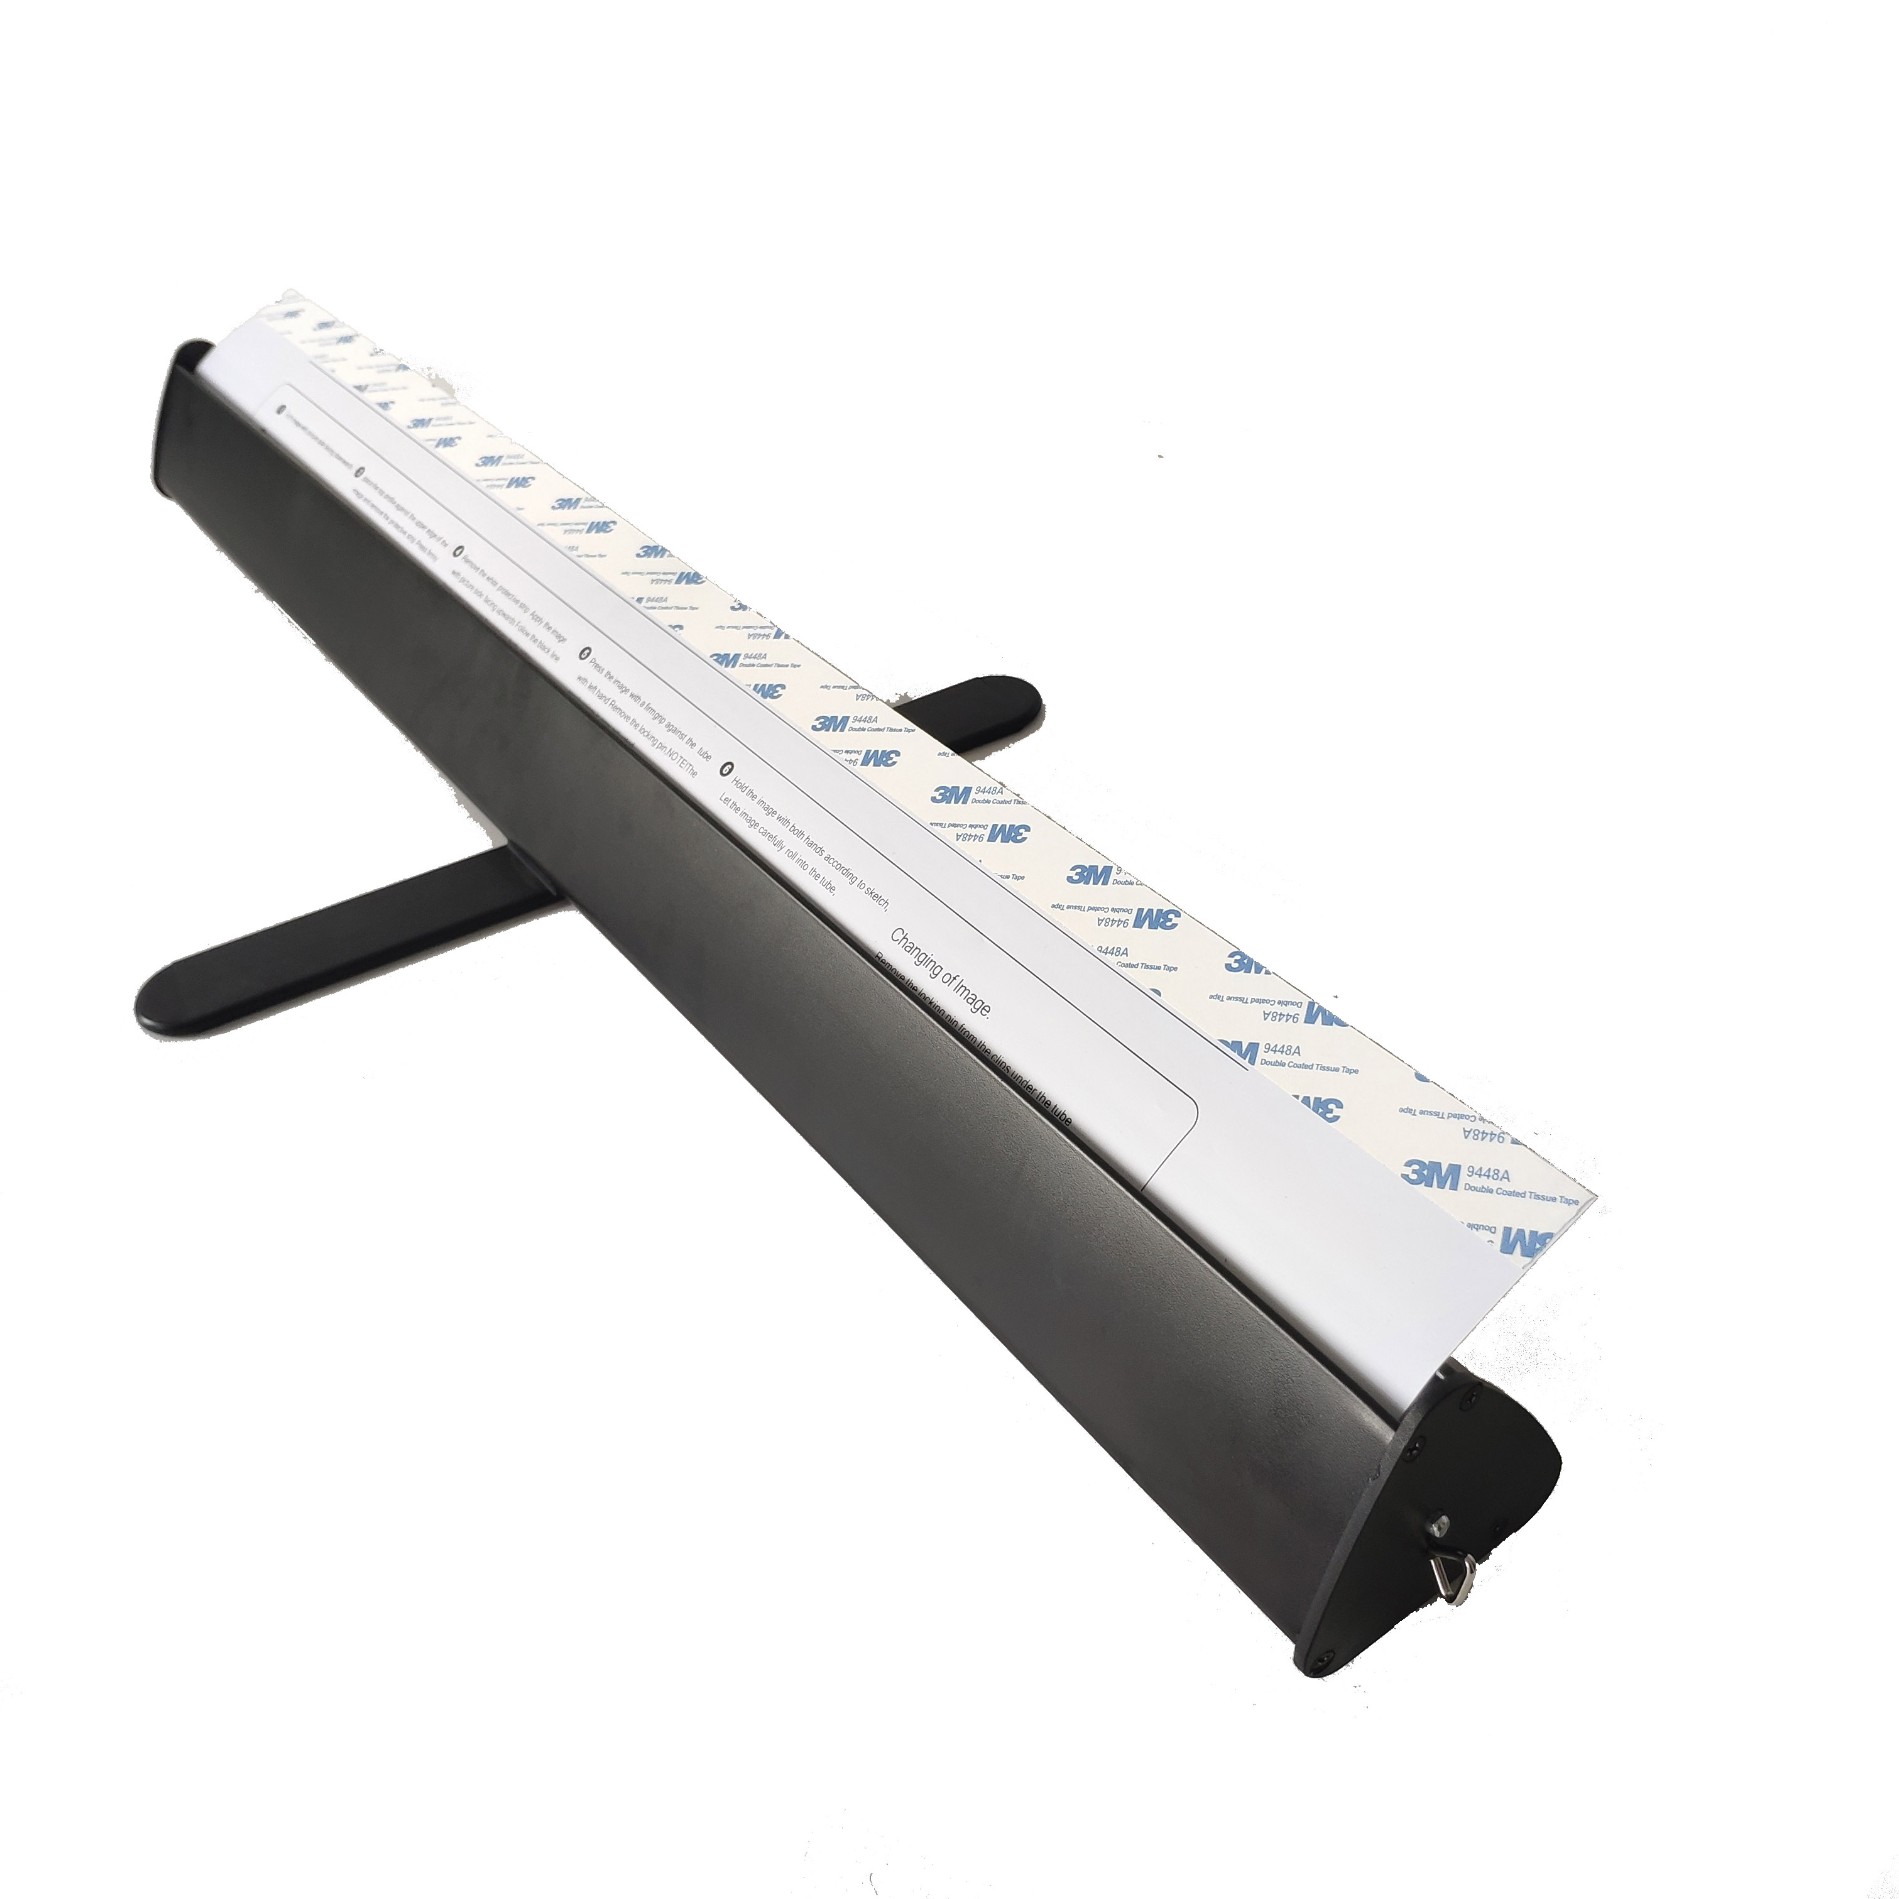 2020 New Triangle Retractable Banner Stand Black Color Manufacturers, 2020 New Triangle Retractable Banner Stand Black Color Factory, Supply 2020 New Triangle Retractable Banner Stand Black Color